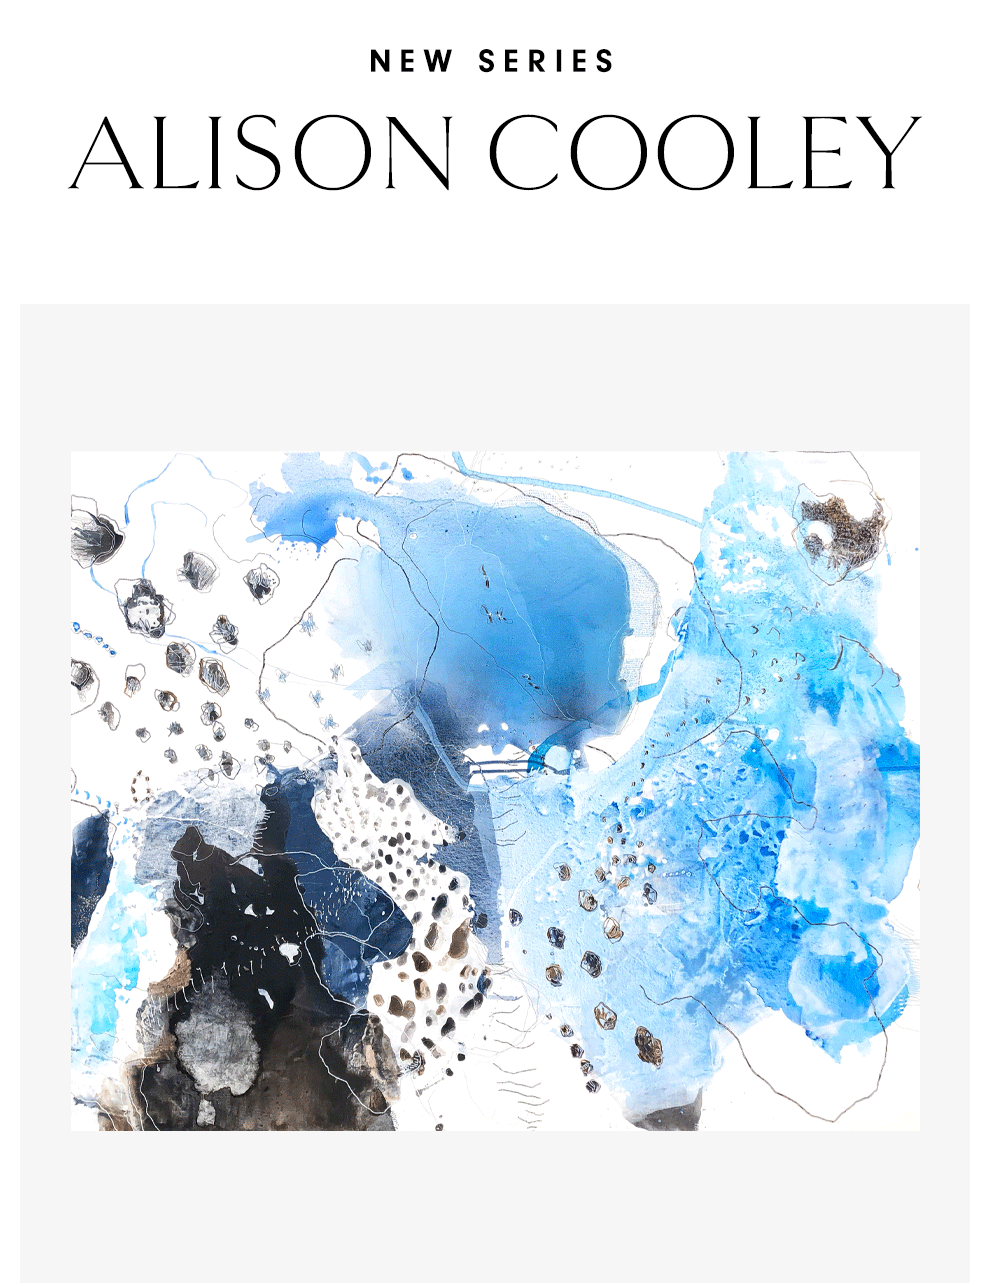 New Series: Alison Cooley